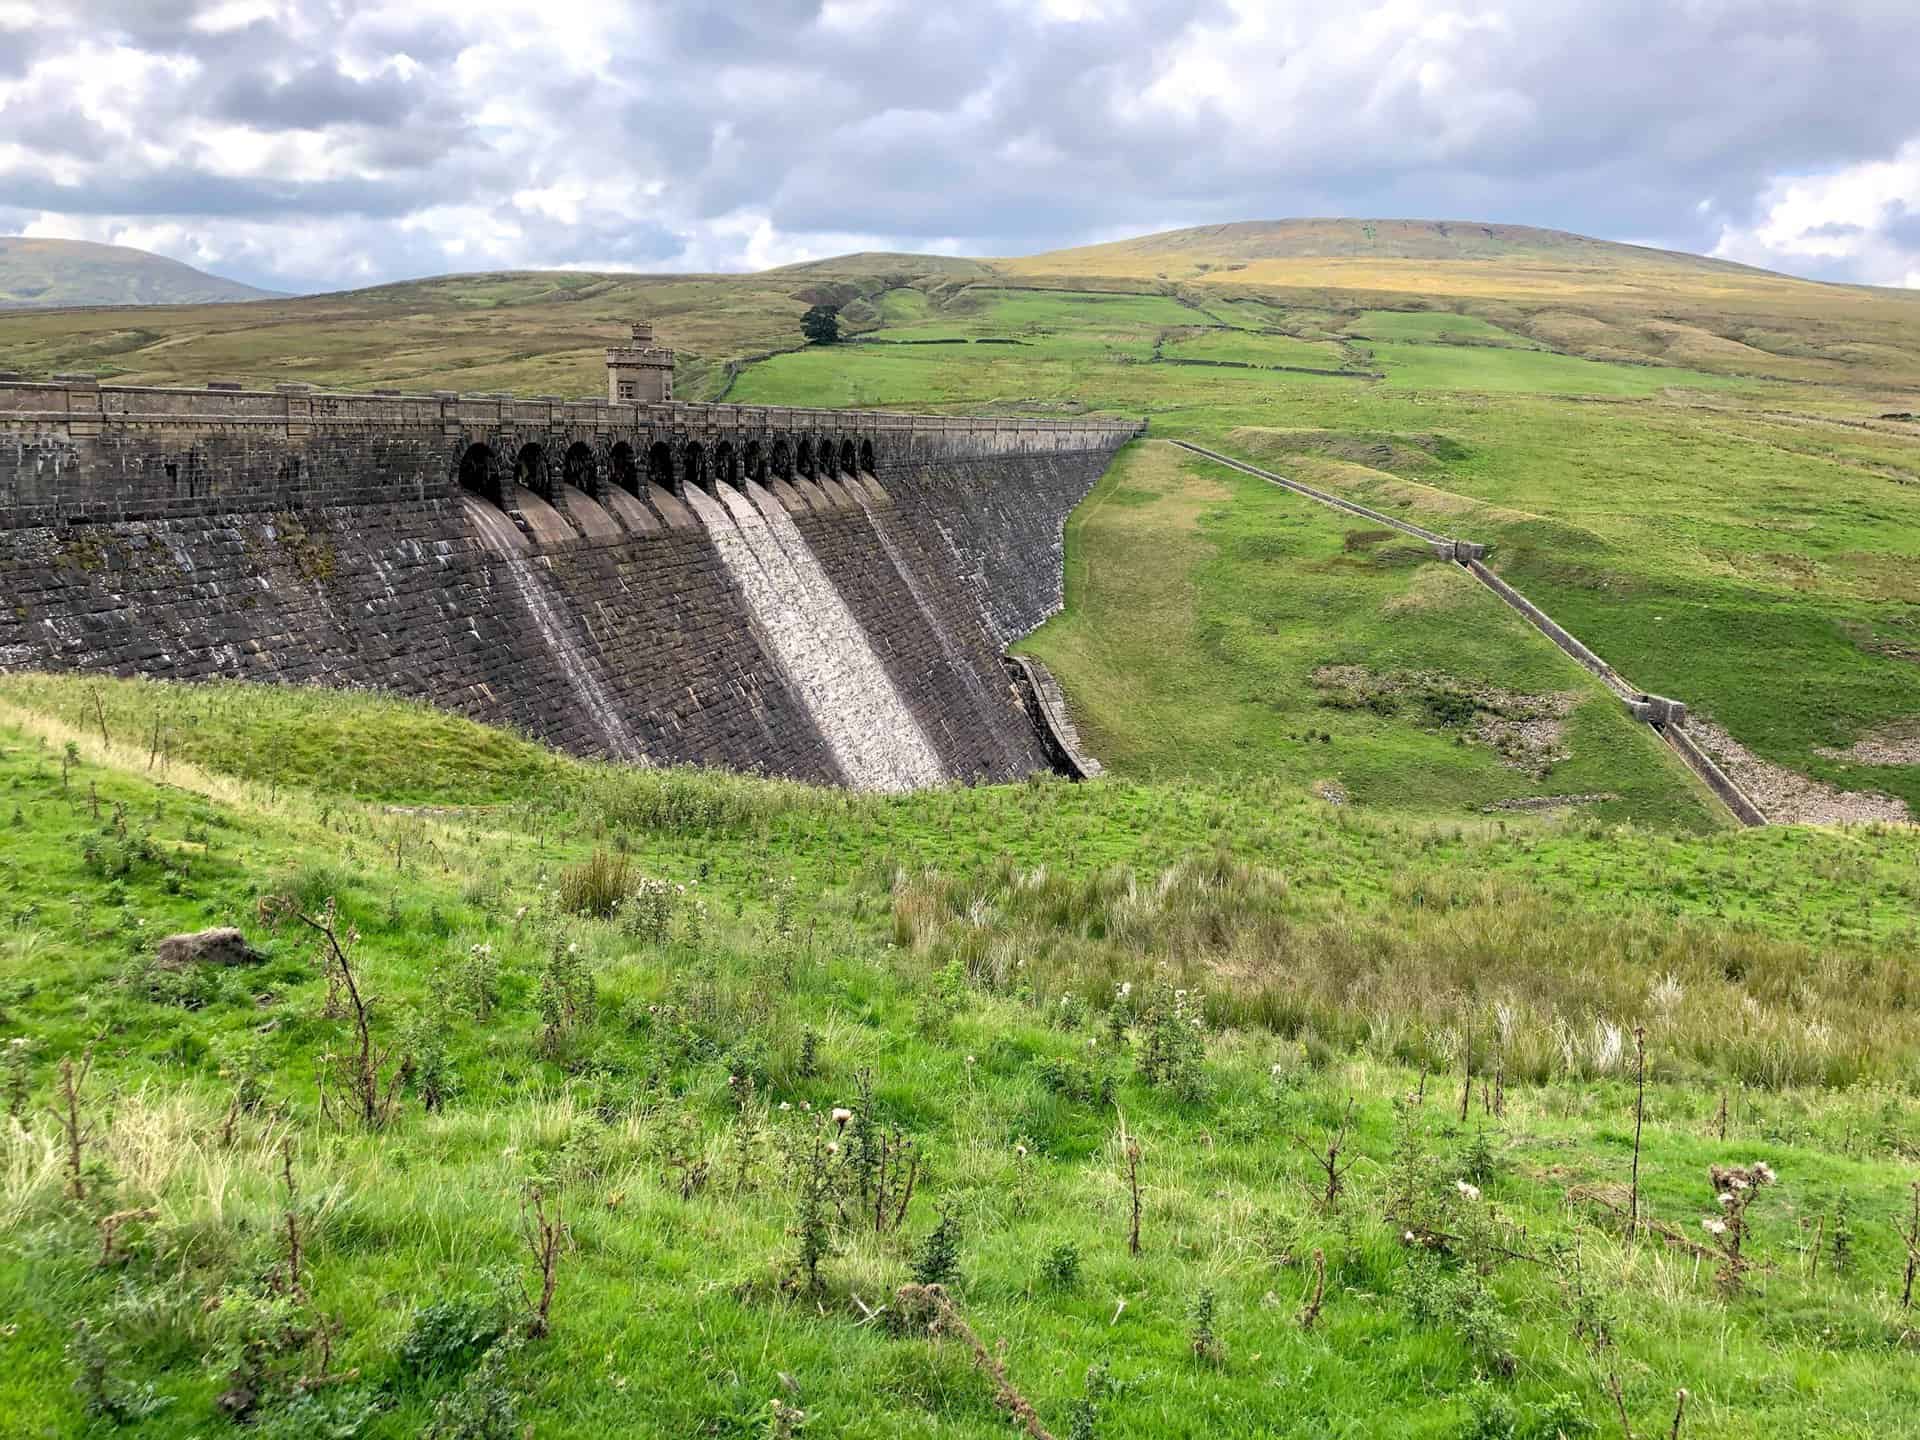 Angram Reservoir dam and tower. The hill in the background is Little Whernside.